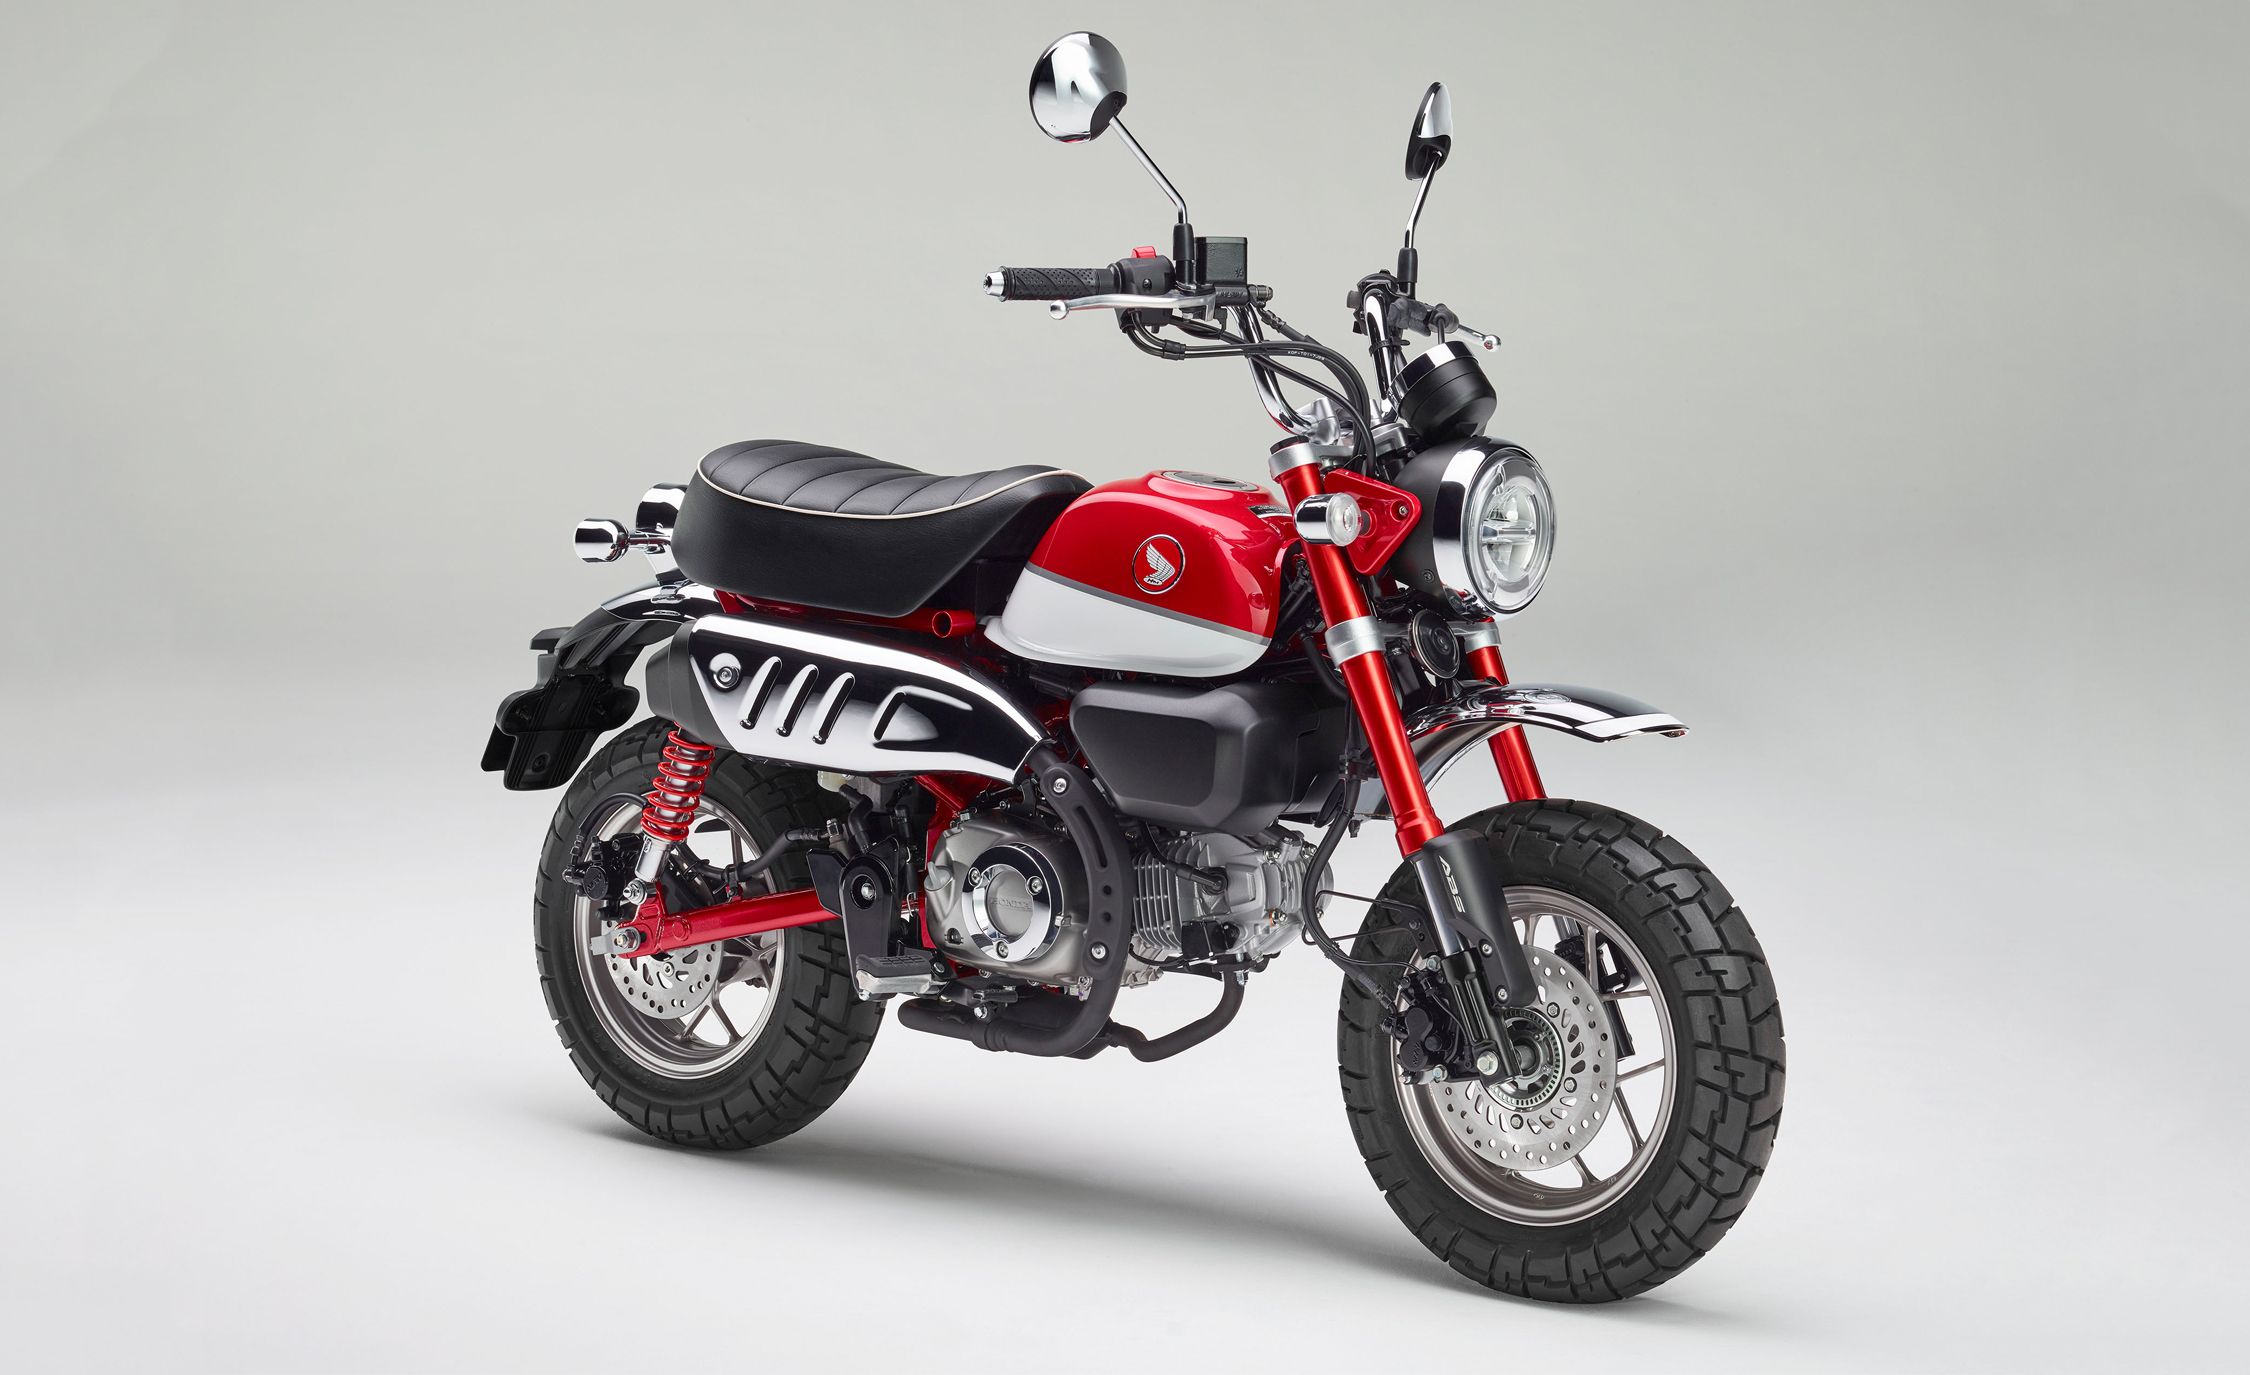 Honda Is Bringing Super Cub and Monkey Motorcycles Back to the U.S.